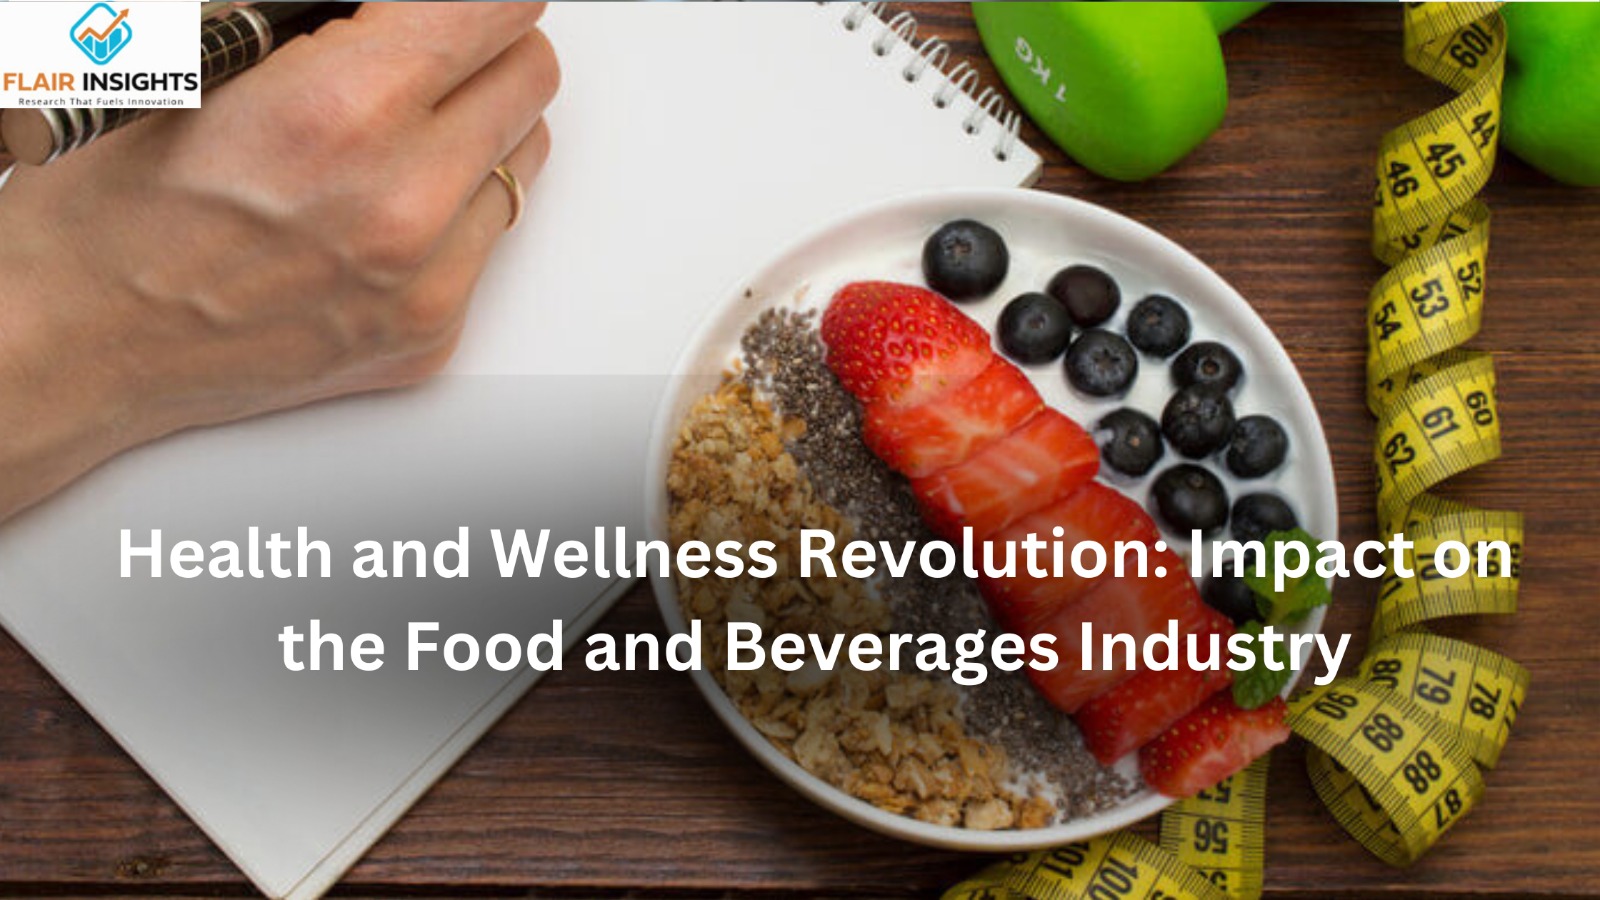 Health and Wellness Revolution: Impact on the Food and Beverages Industry